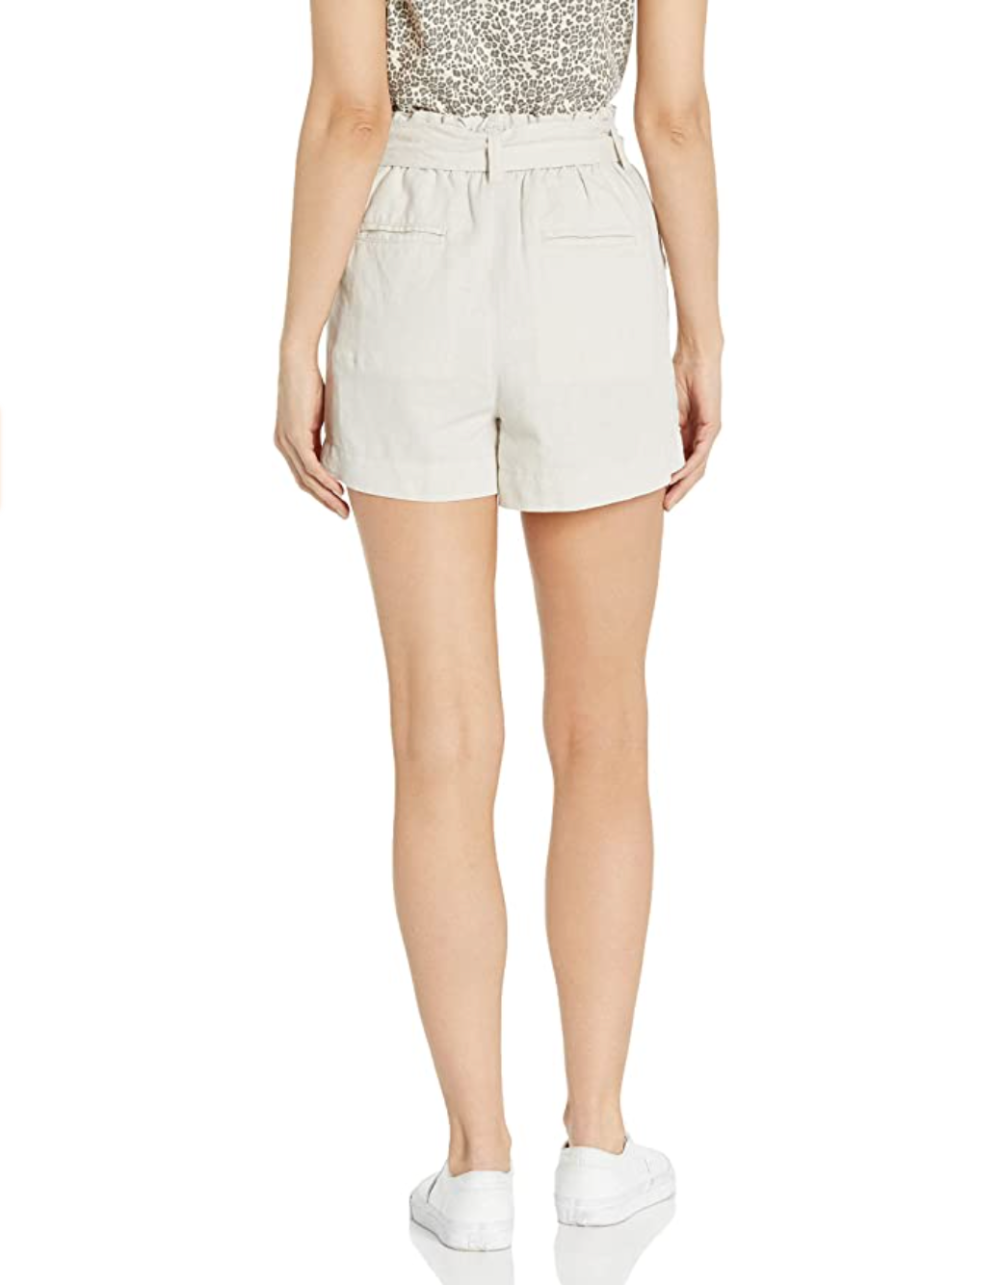 Goodthreads Paper-Bag Shorts Are ‘Super Comfortable and Flattering ...